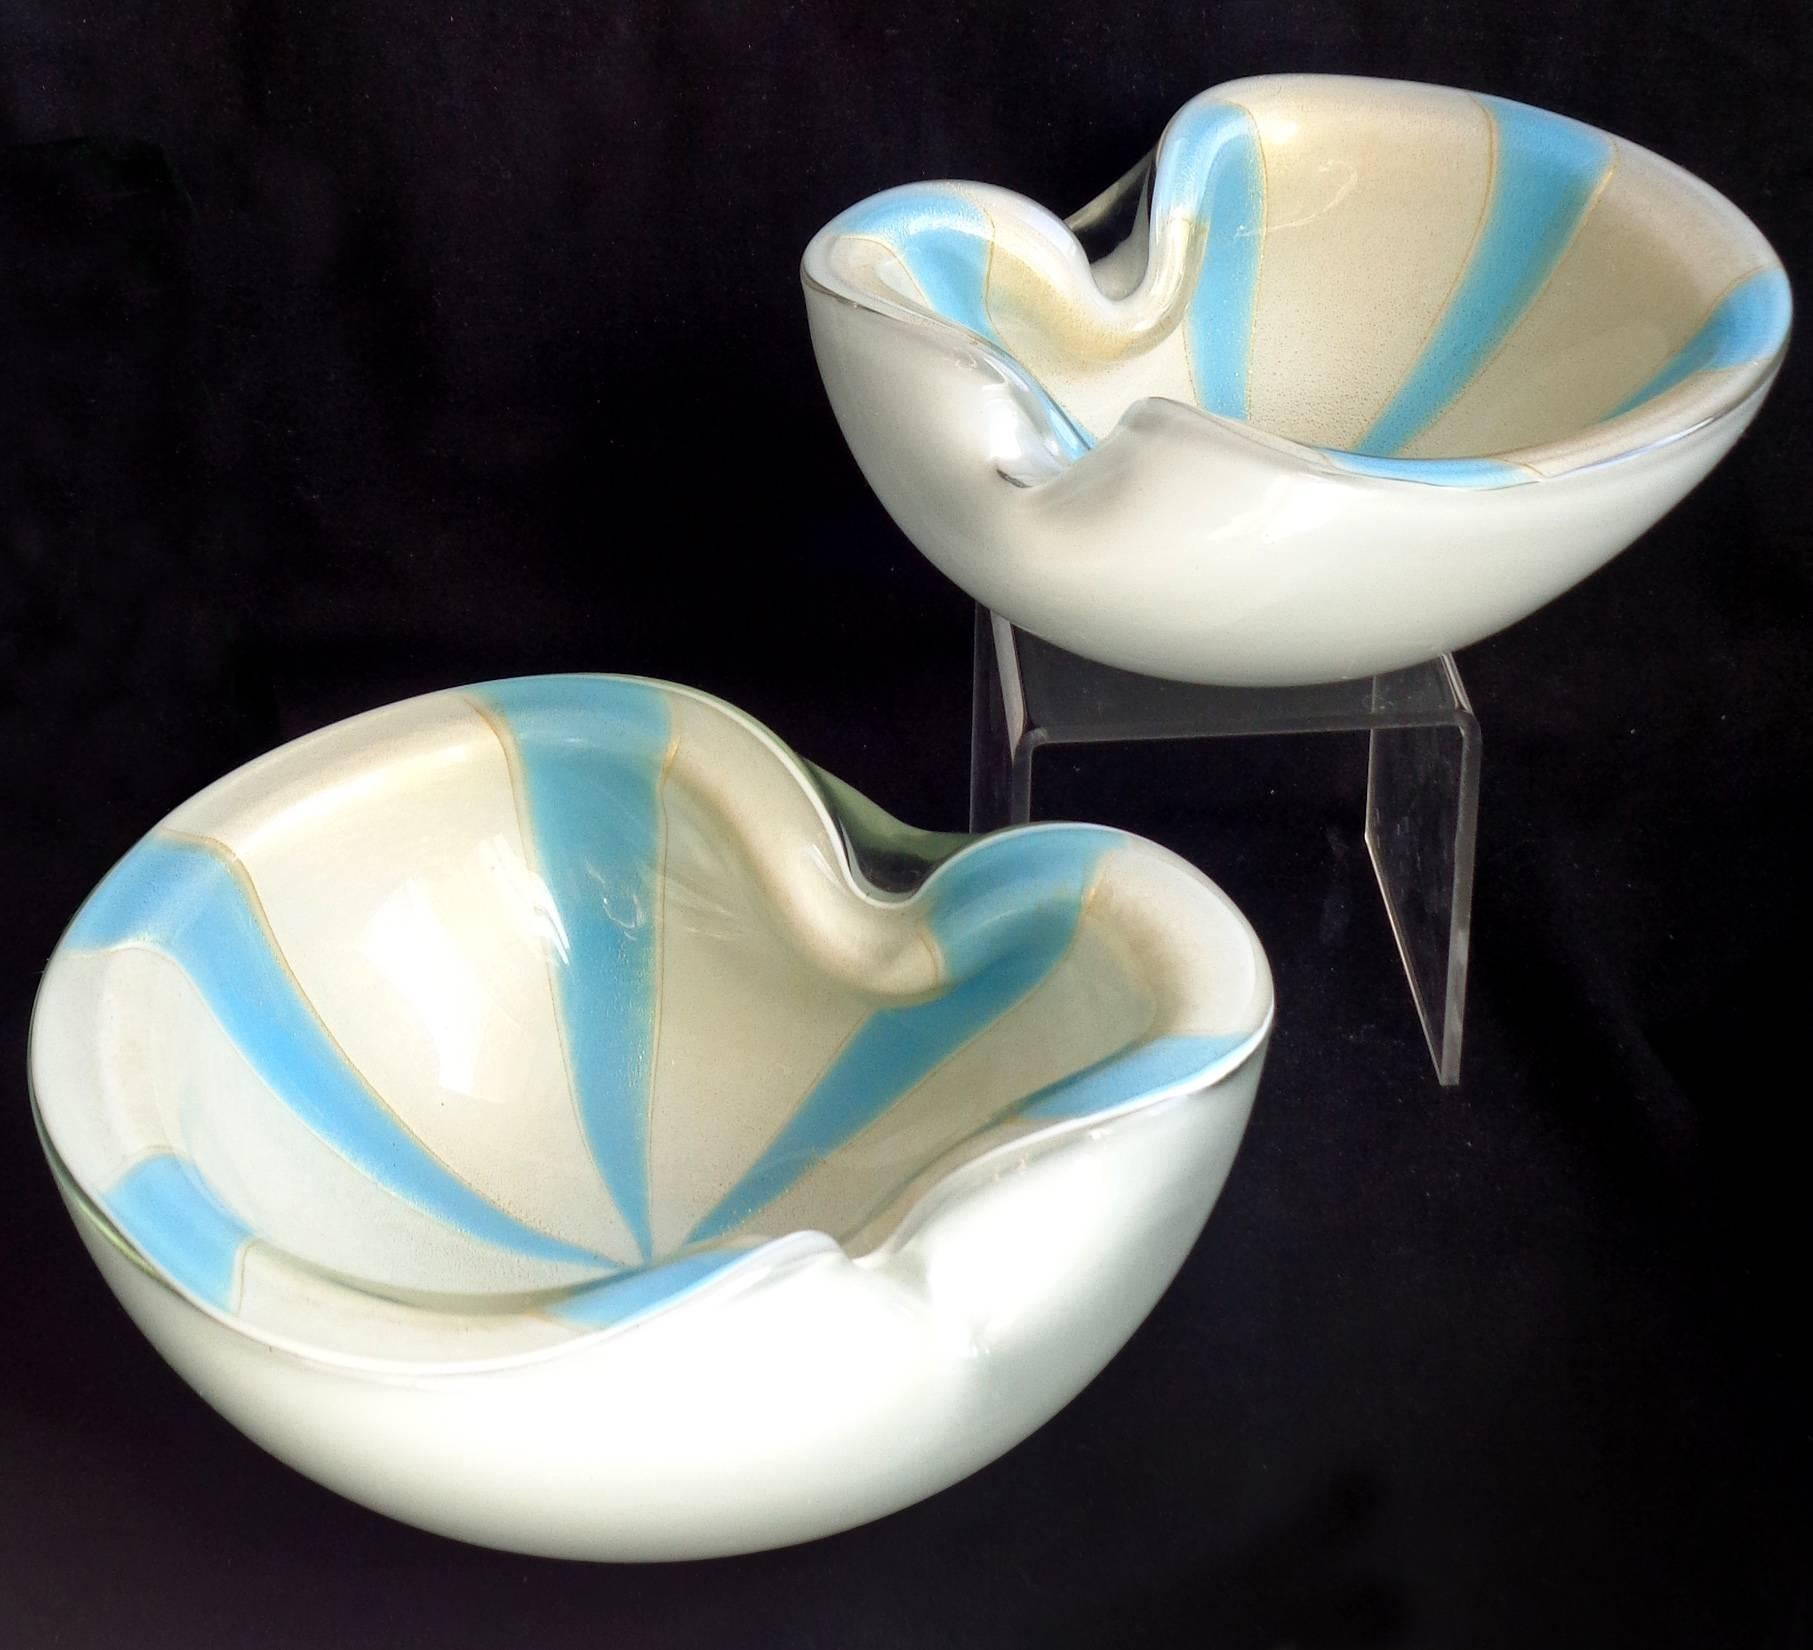 Beautiful set of vintage Murano hand blown white, blue stripes and gold flecks Italian art glass bowls. Documented to designer Alfredo Barbini, circa 1950-1960. Published in his catalog. Better than the photos show. Can be used as display pieces on